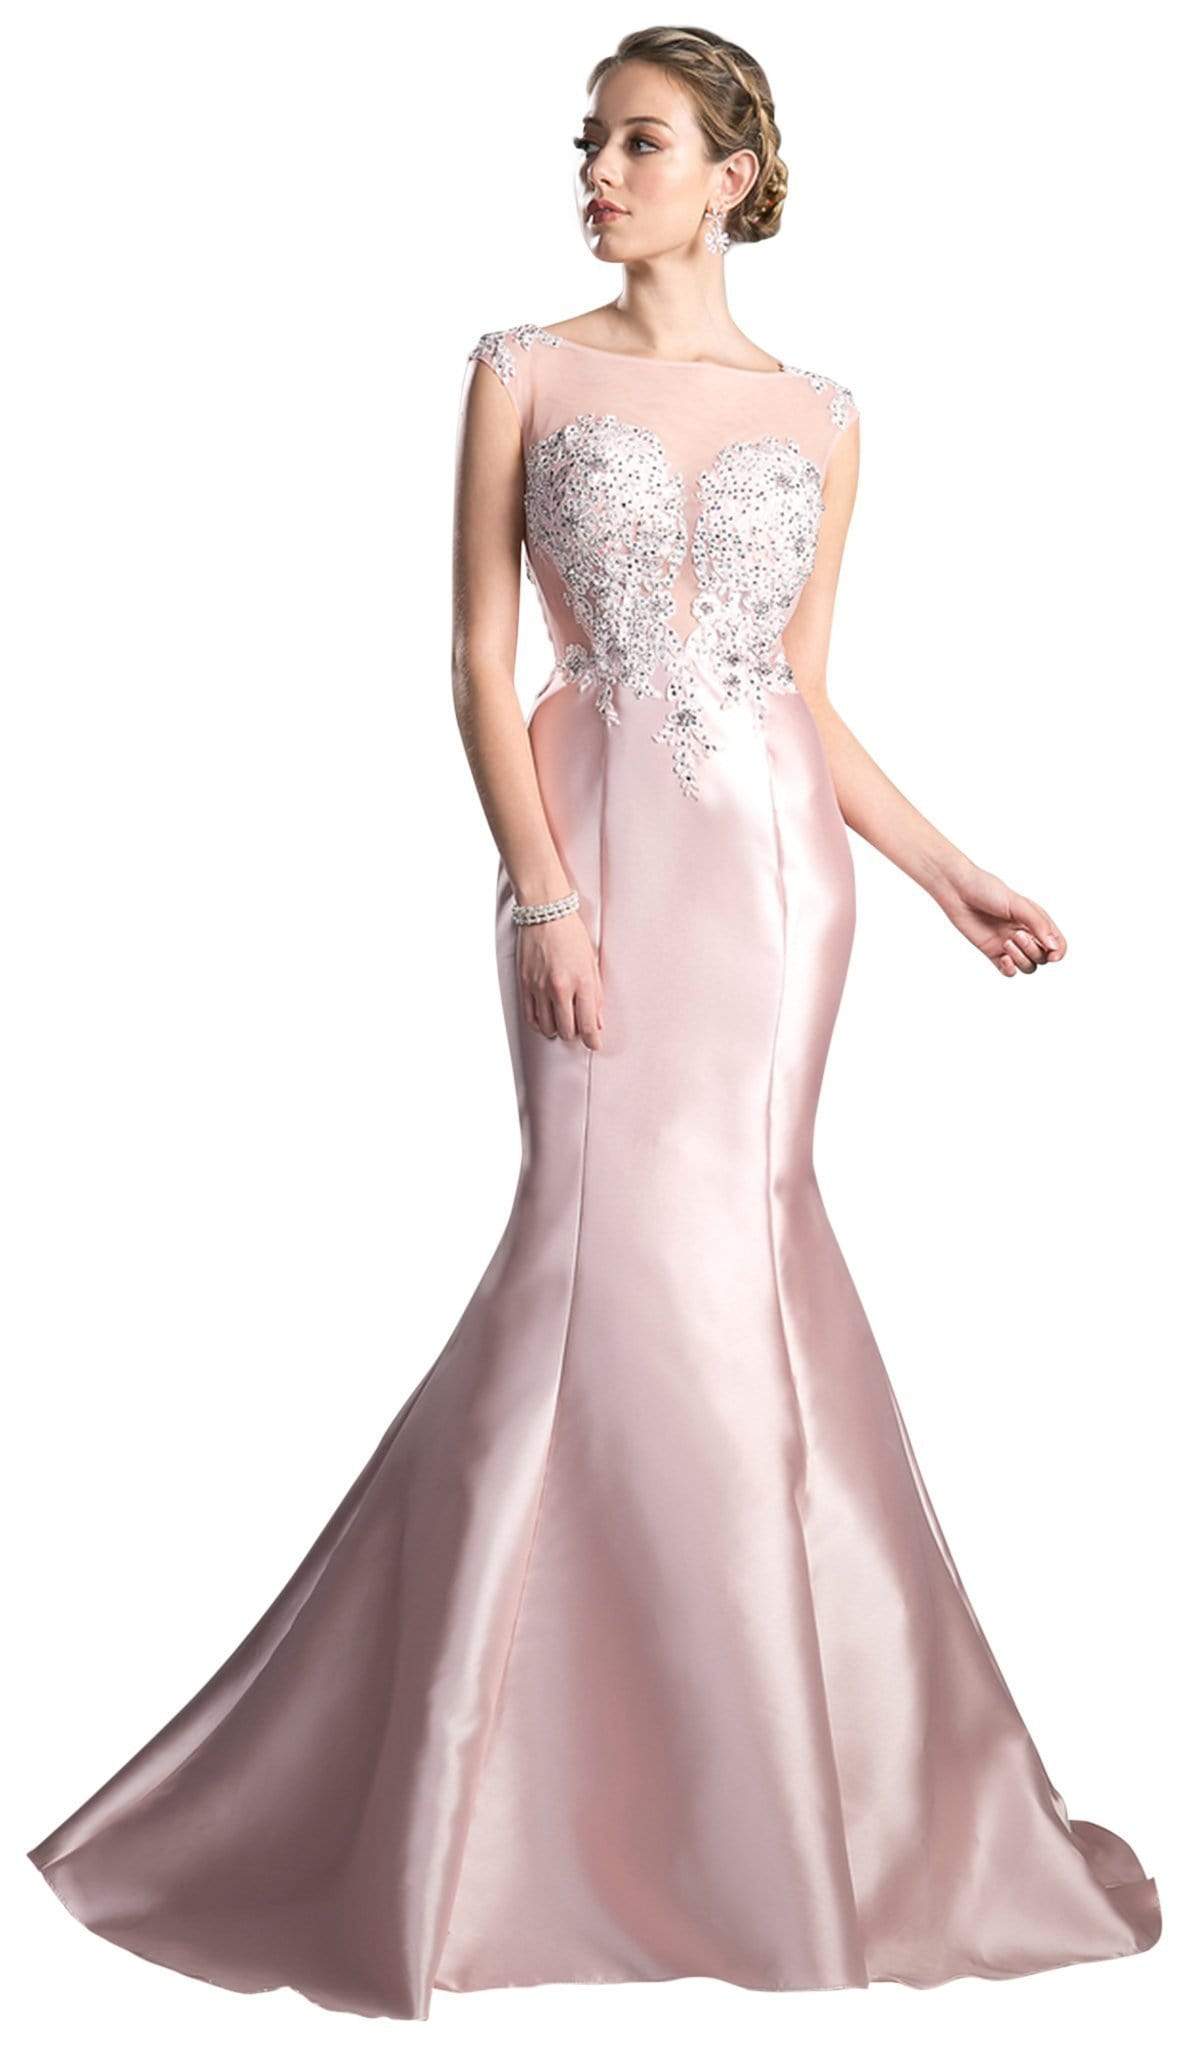 Cinderella Divine - Cap Sleeve Appliqued Plunging Illusion Gown Special Occasion Dress 2 / Dusty Rose